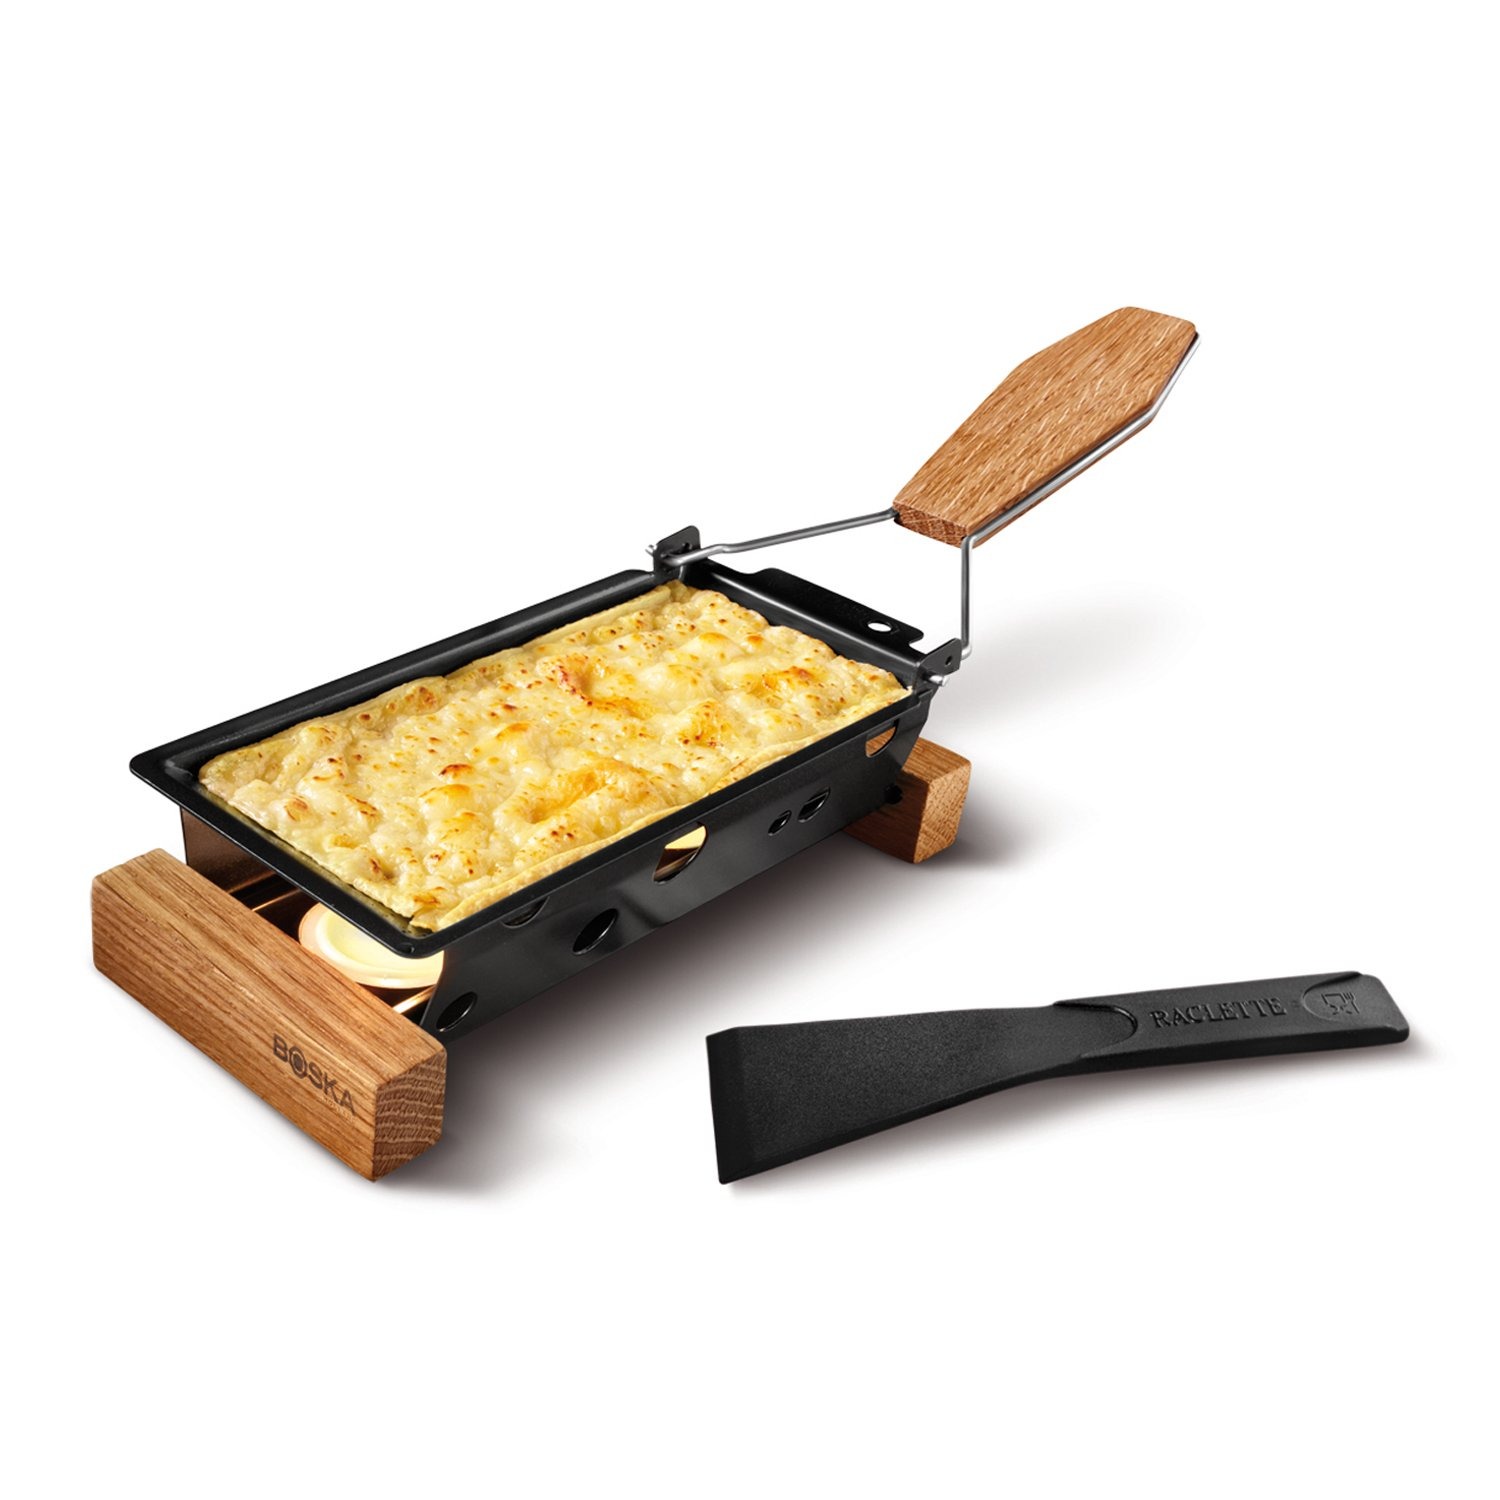 Portable Raclette for Melting Cheese